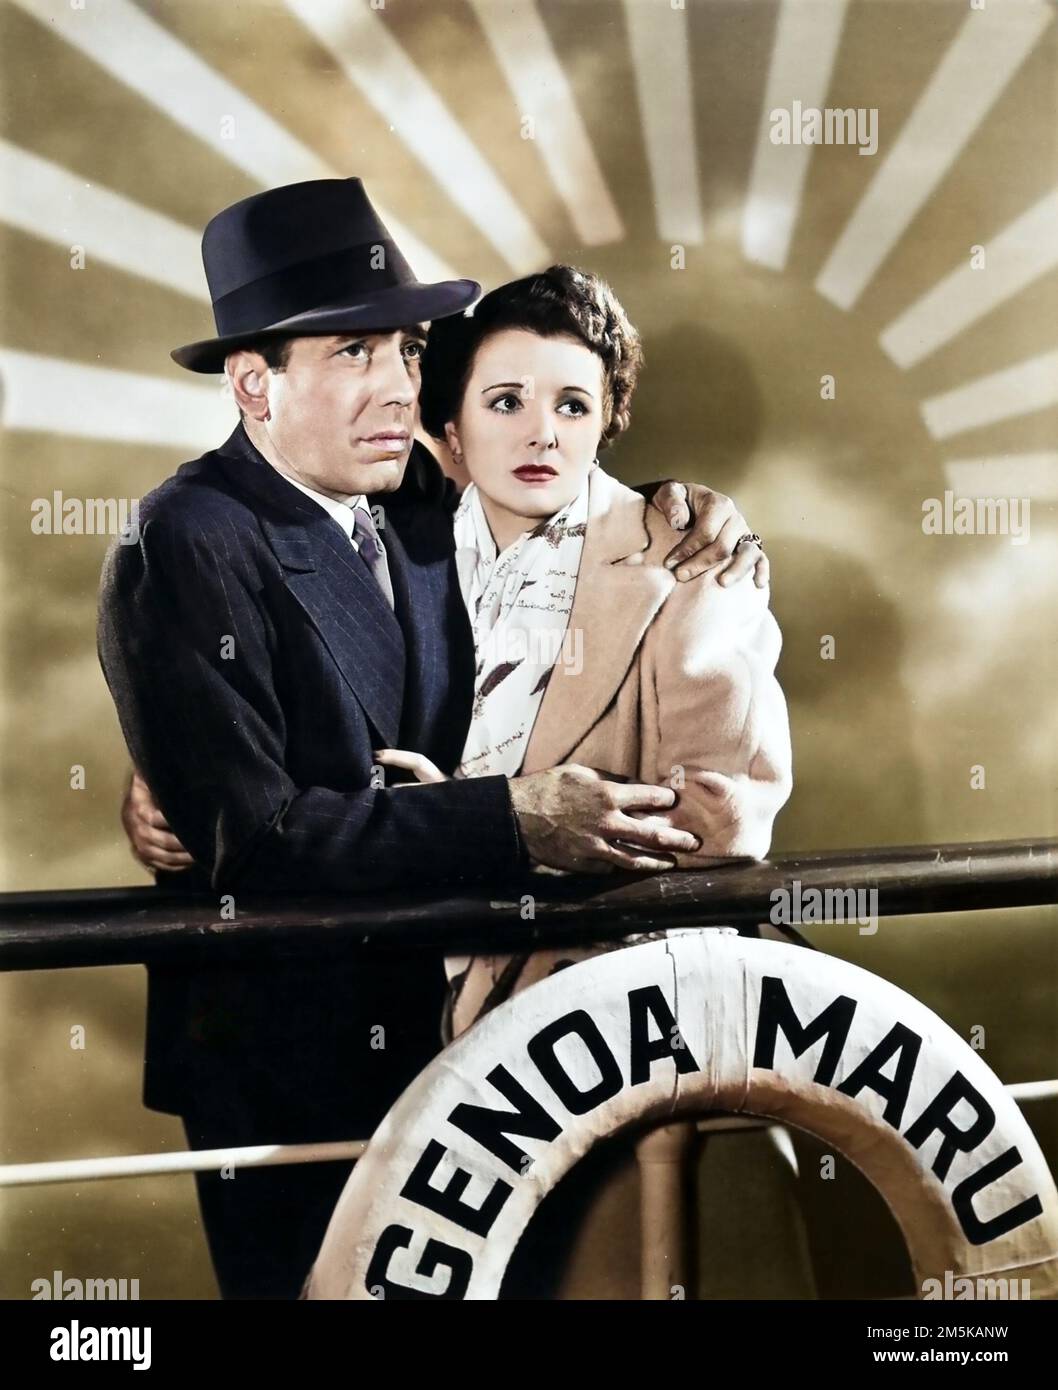 Humphrey Bogart & Mary Astor in Across the Pacific (Warner Brothers, 1942). Portrait Photo - colorized Stock Photo